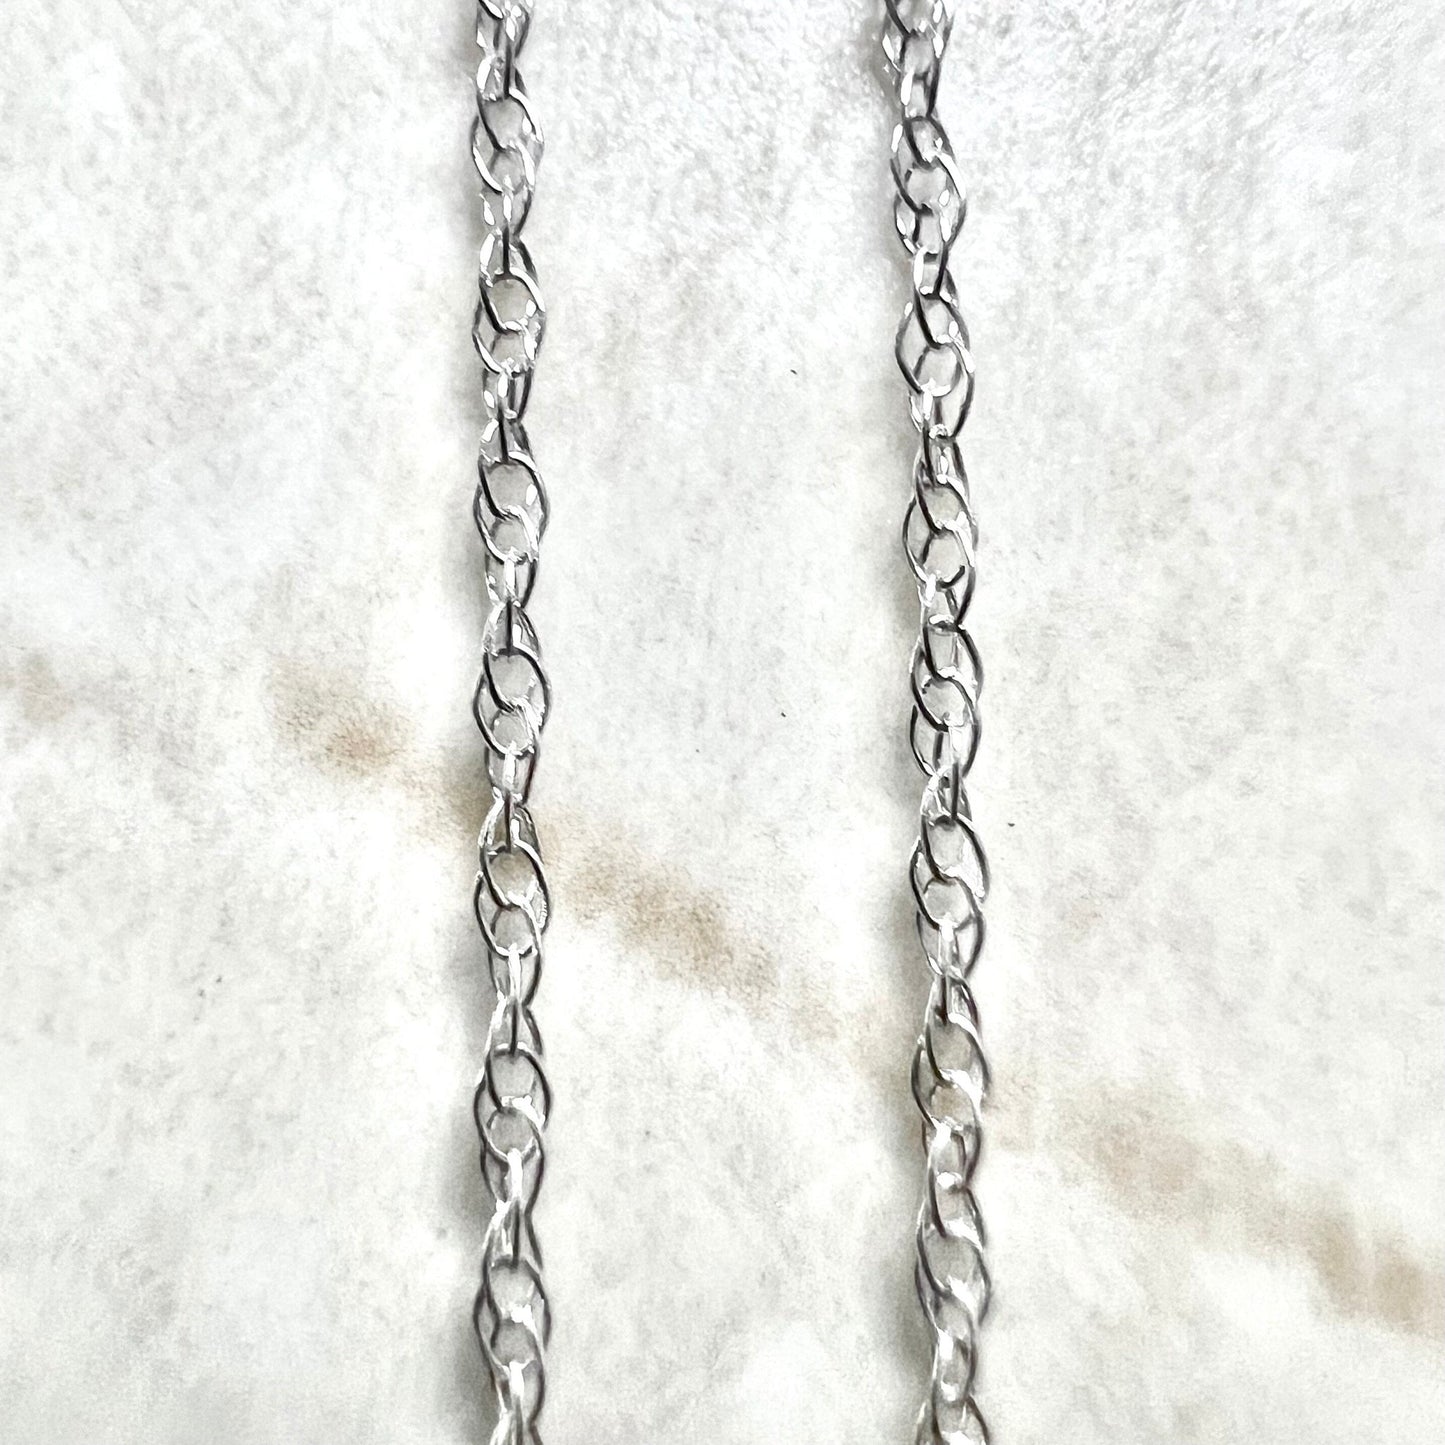 Lightweight 14K White Gold Rope Chain Necklace - 18 Inch Gold Chain - 14K Solid White Gold Chain - Christmas Gifts For Her - Rope Necklace